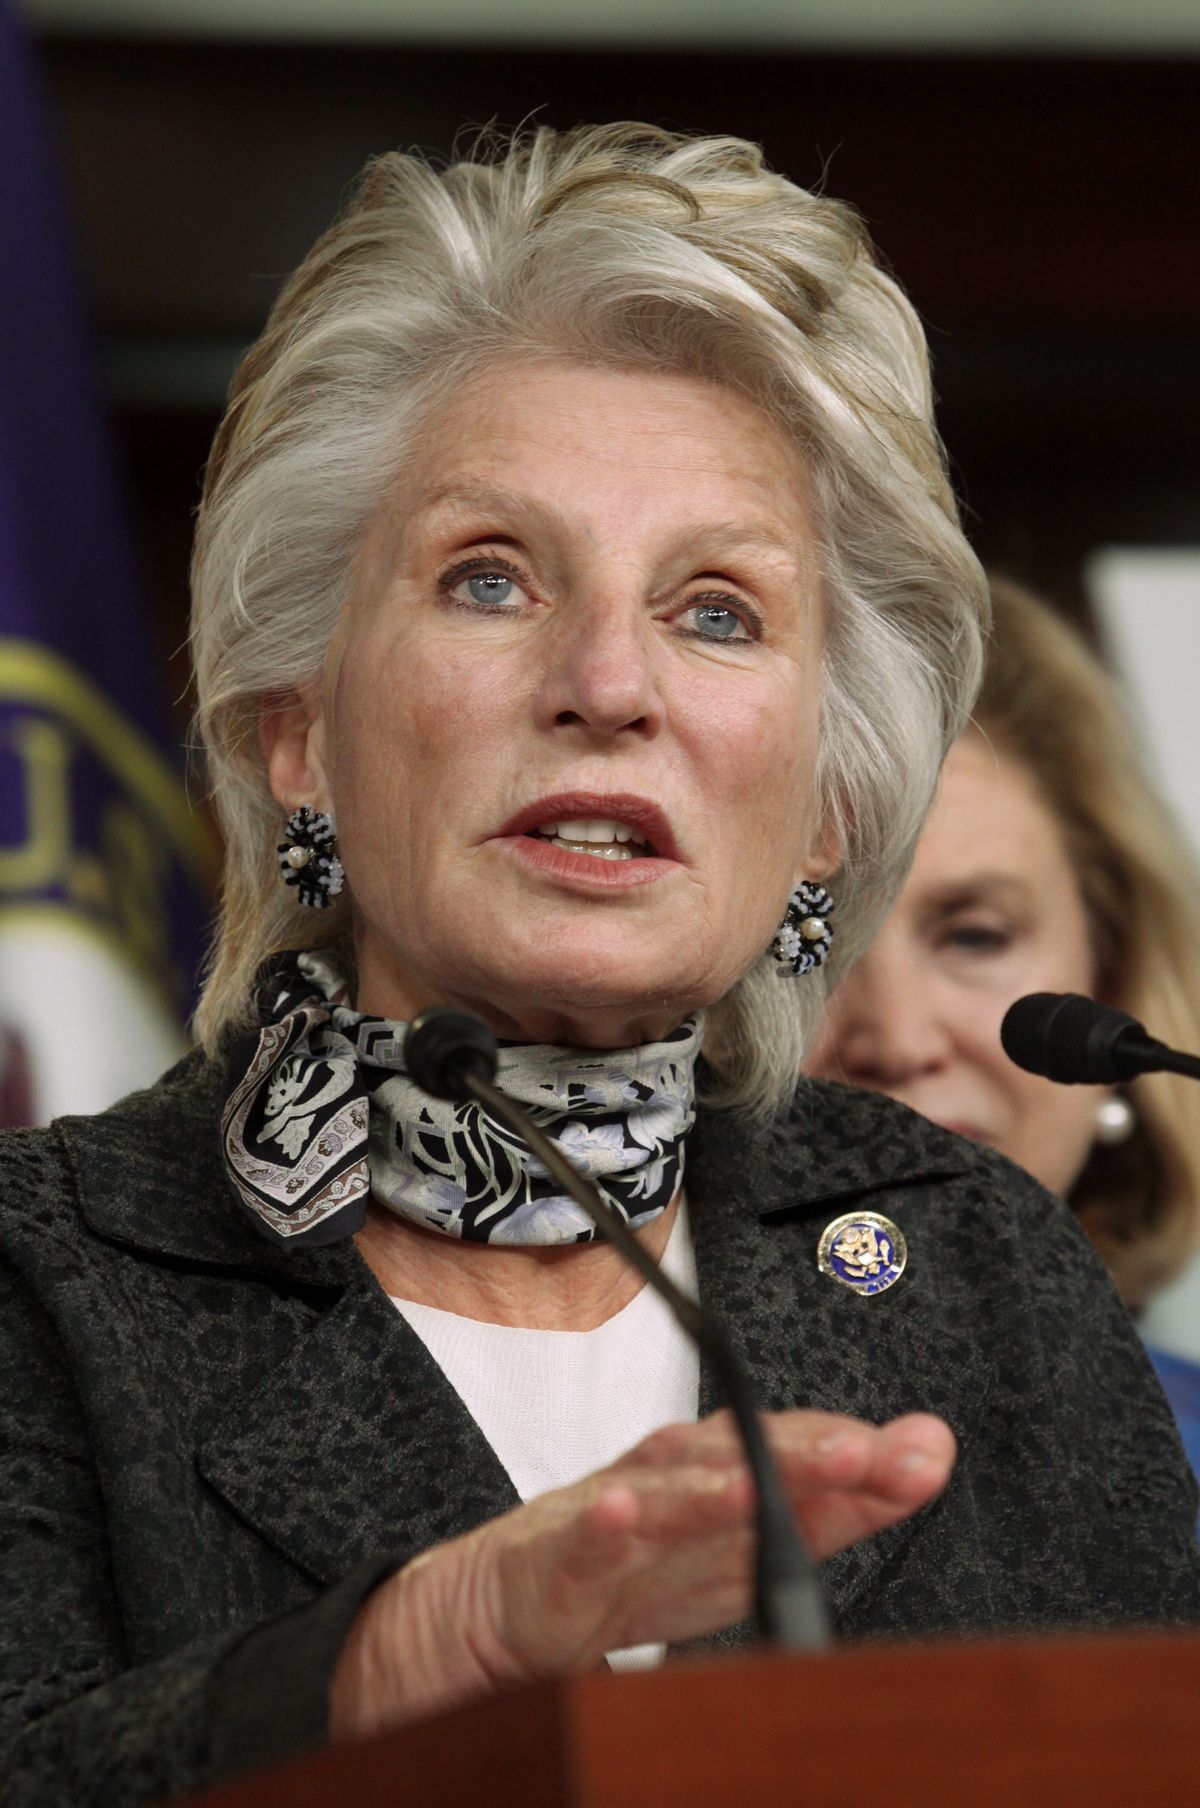 Rep. Jane Harman, D-Calif., speaks on women's issues in the health care bill on Saturday, March 20, 2010 on Capitol Hill in Washington. (AP Photo/Lauren Victoria Burke) (Associated Press)